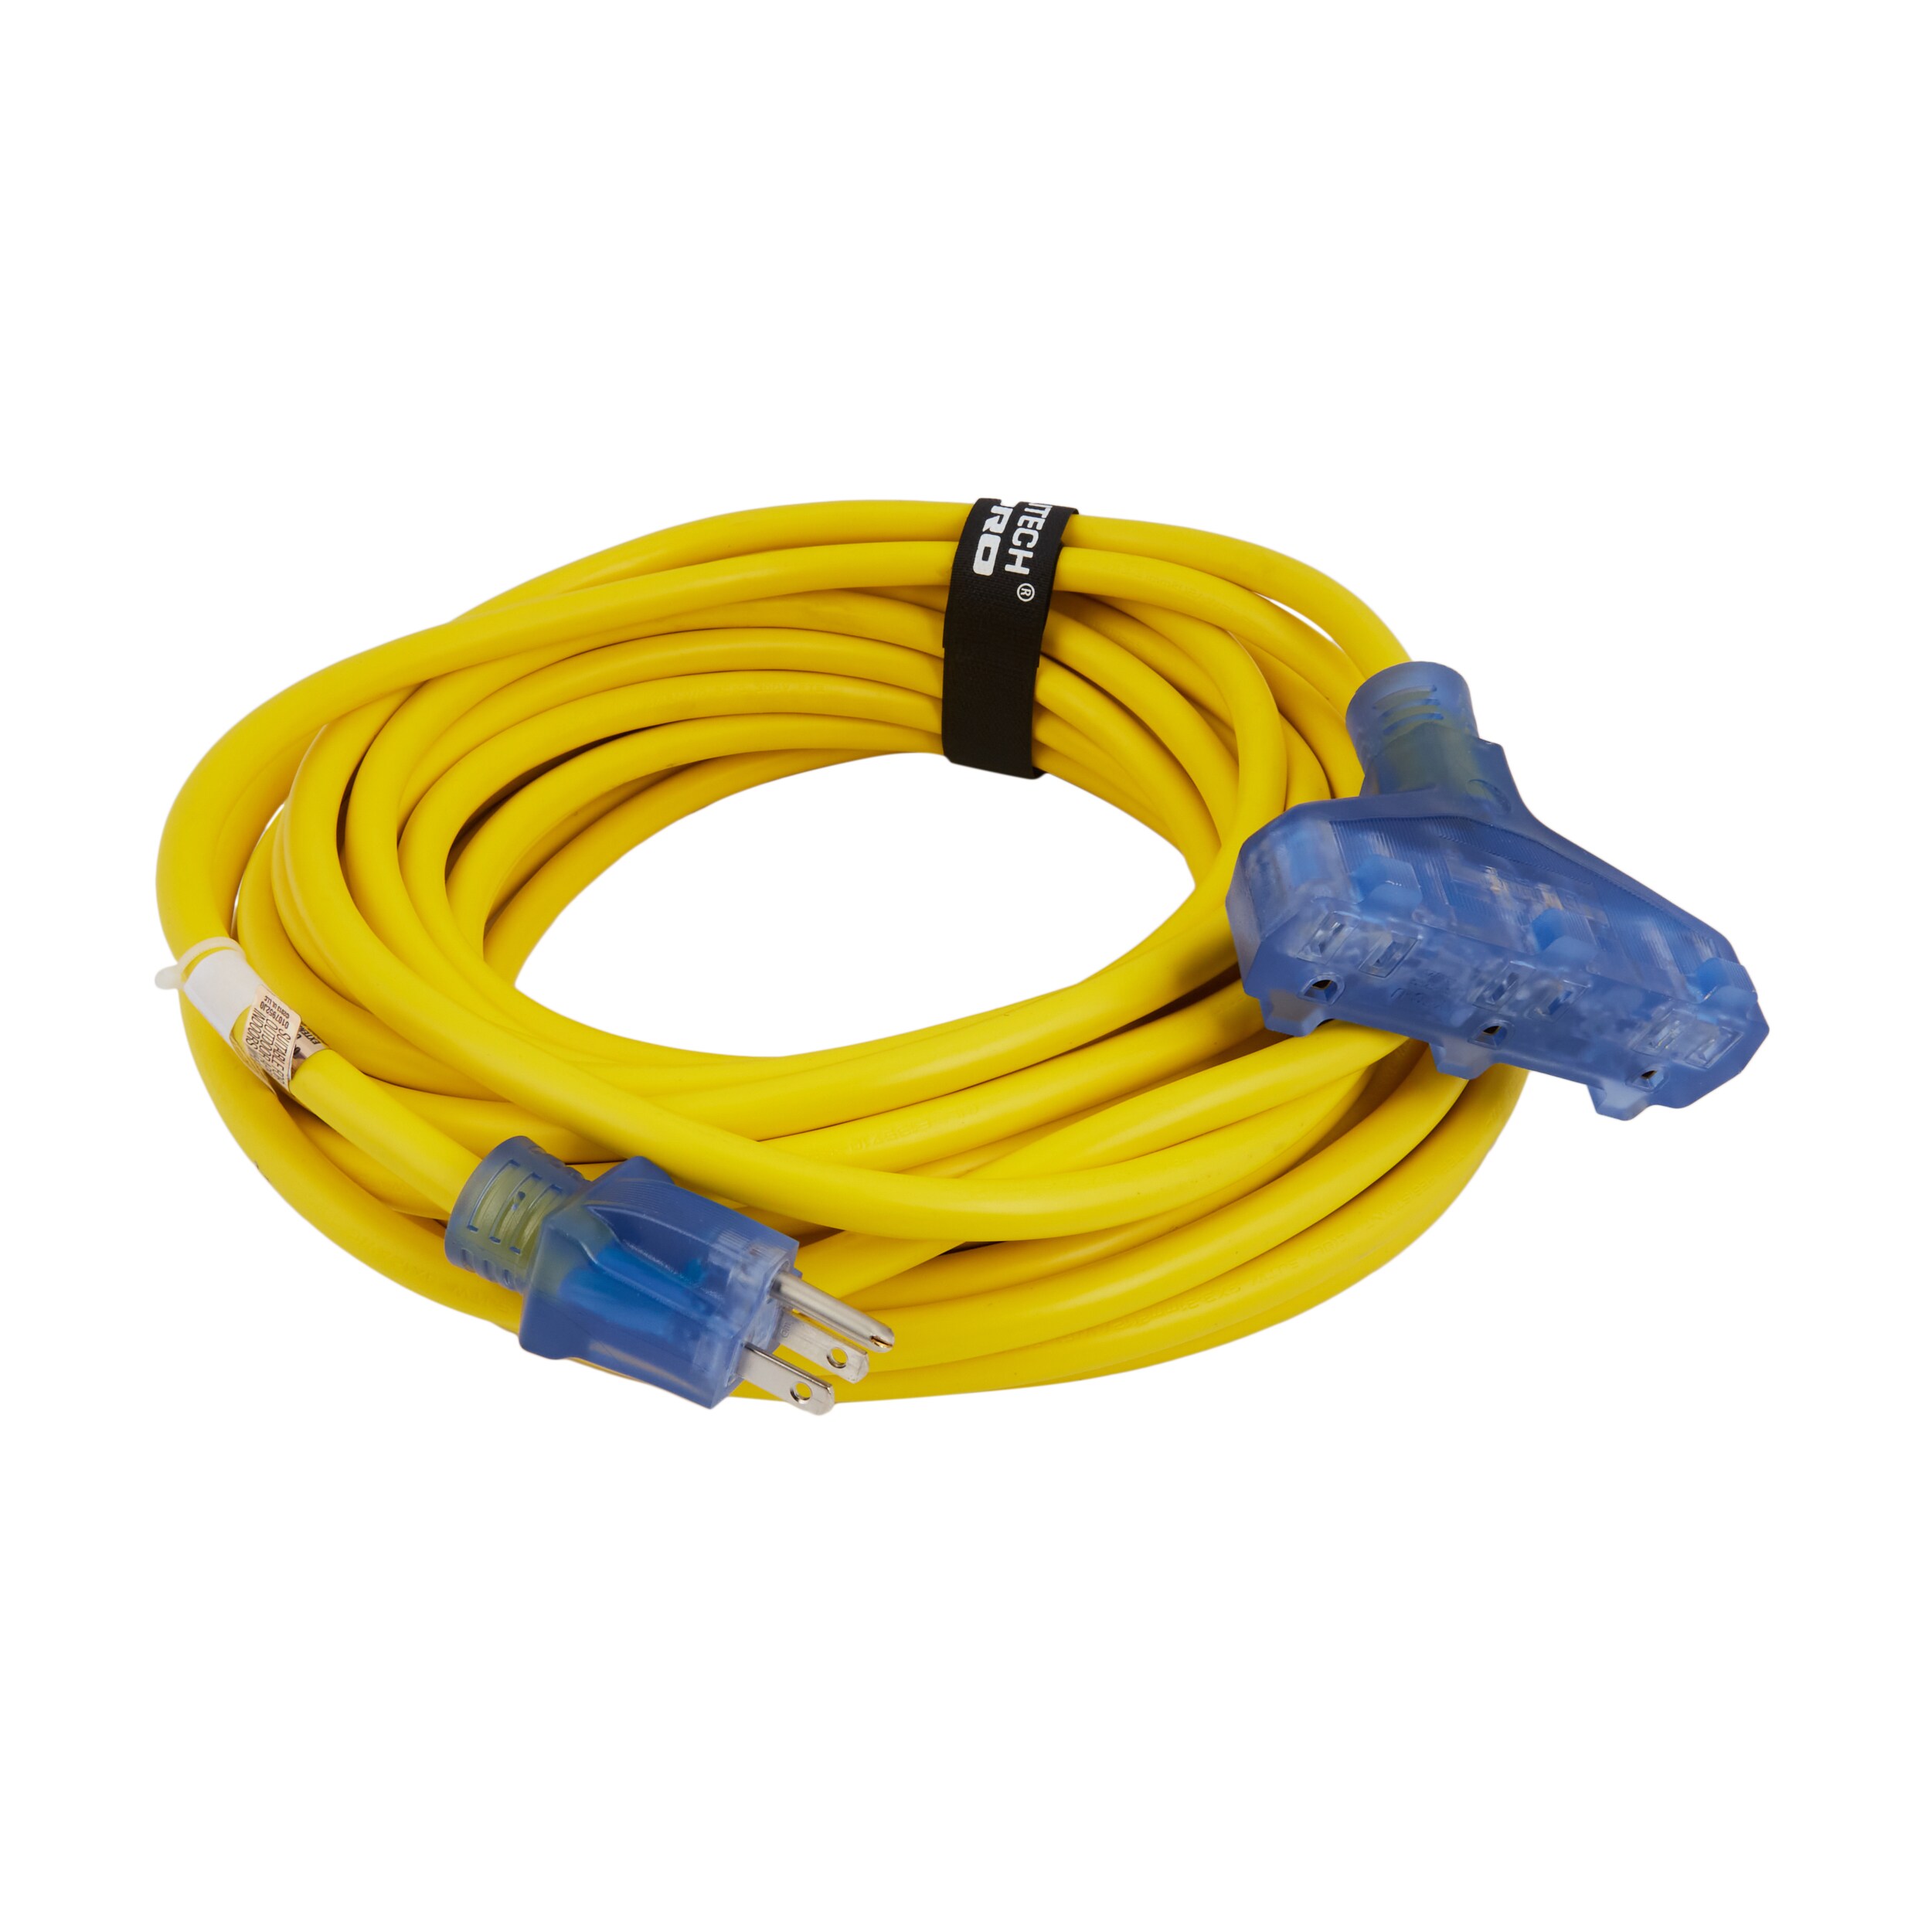 50 ft Extension Cord 16 gauge AWG Heavy Duty Yellow 50' foot feet non-lit end 